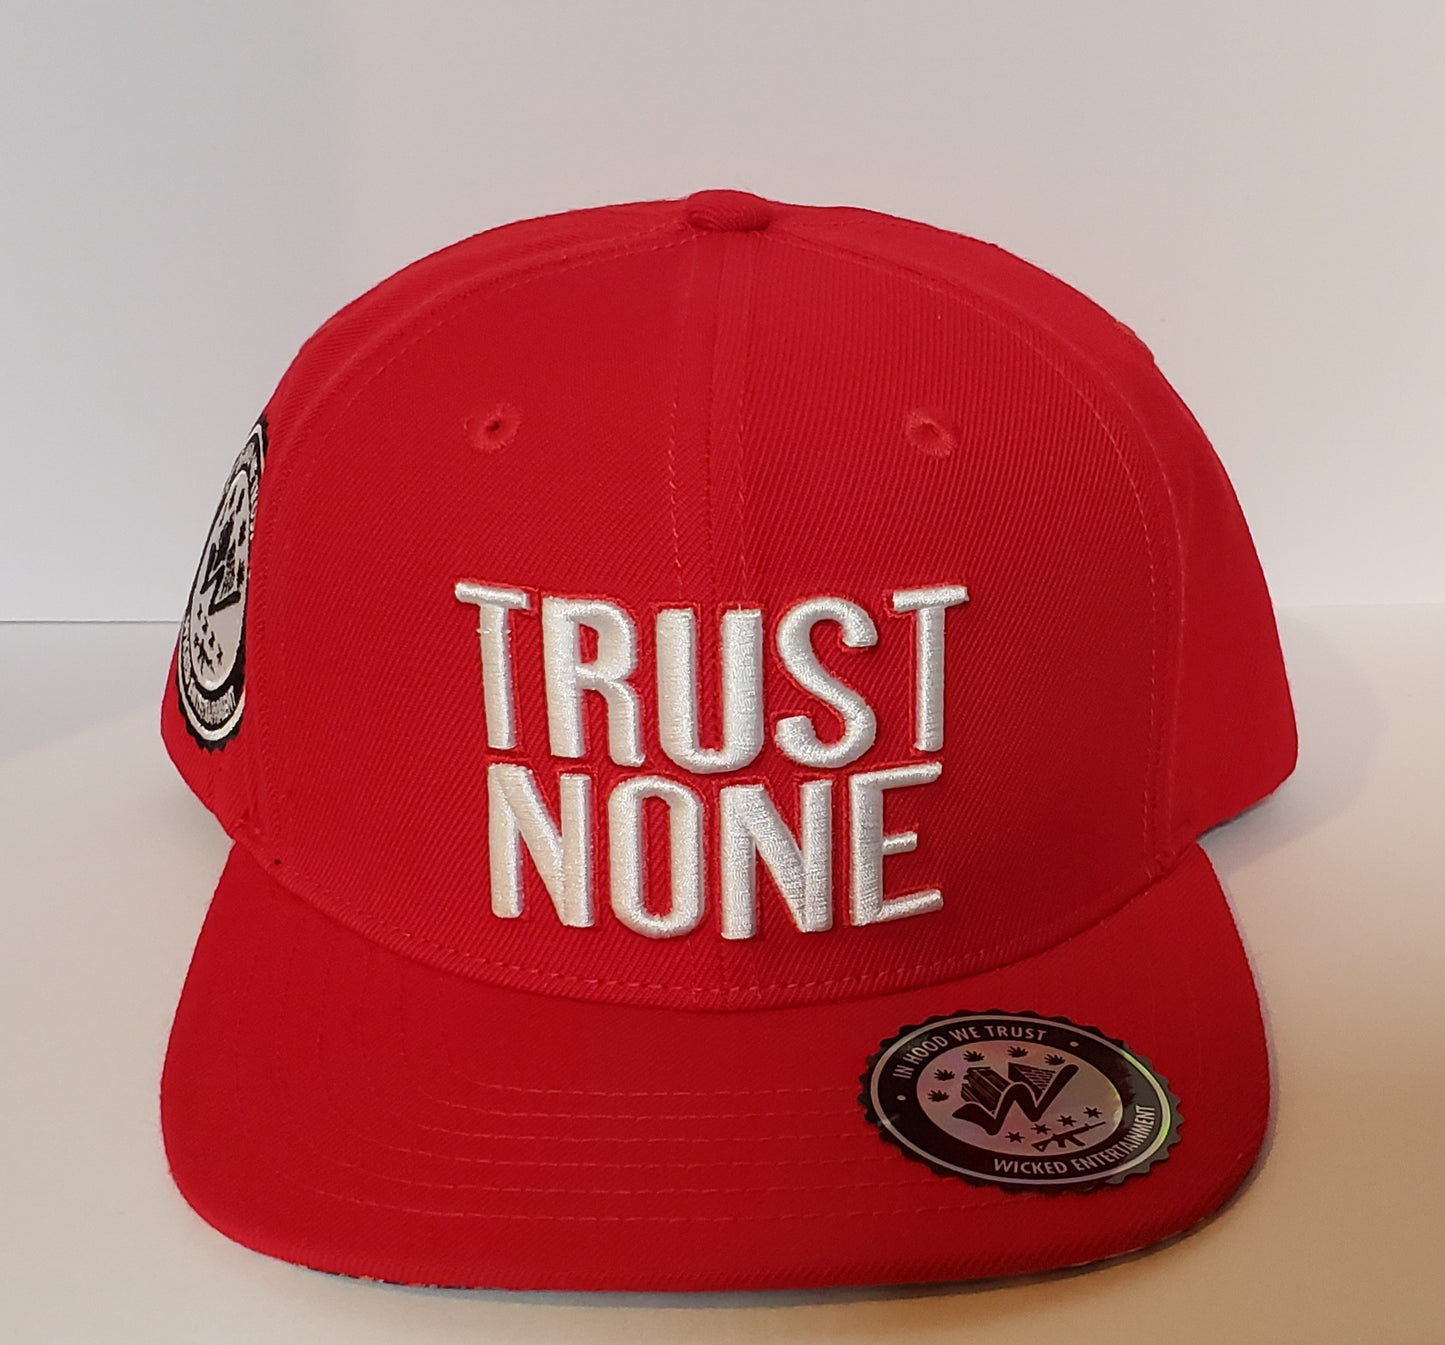 Trust None - Snapback Hat - Red